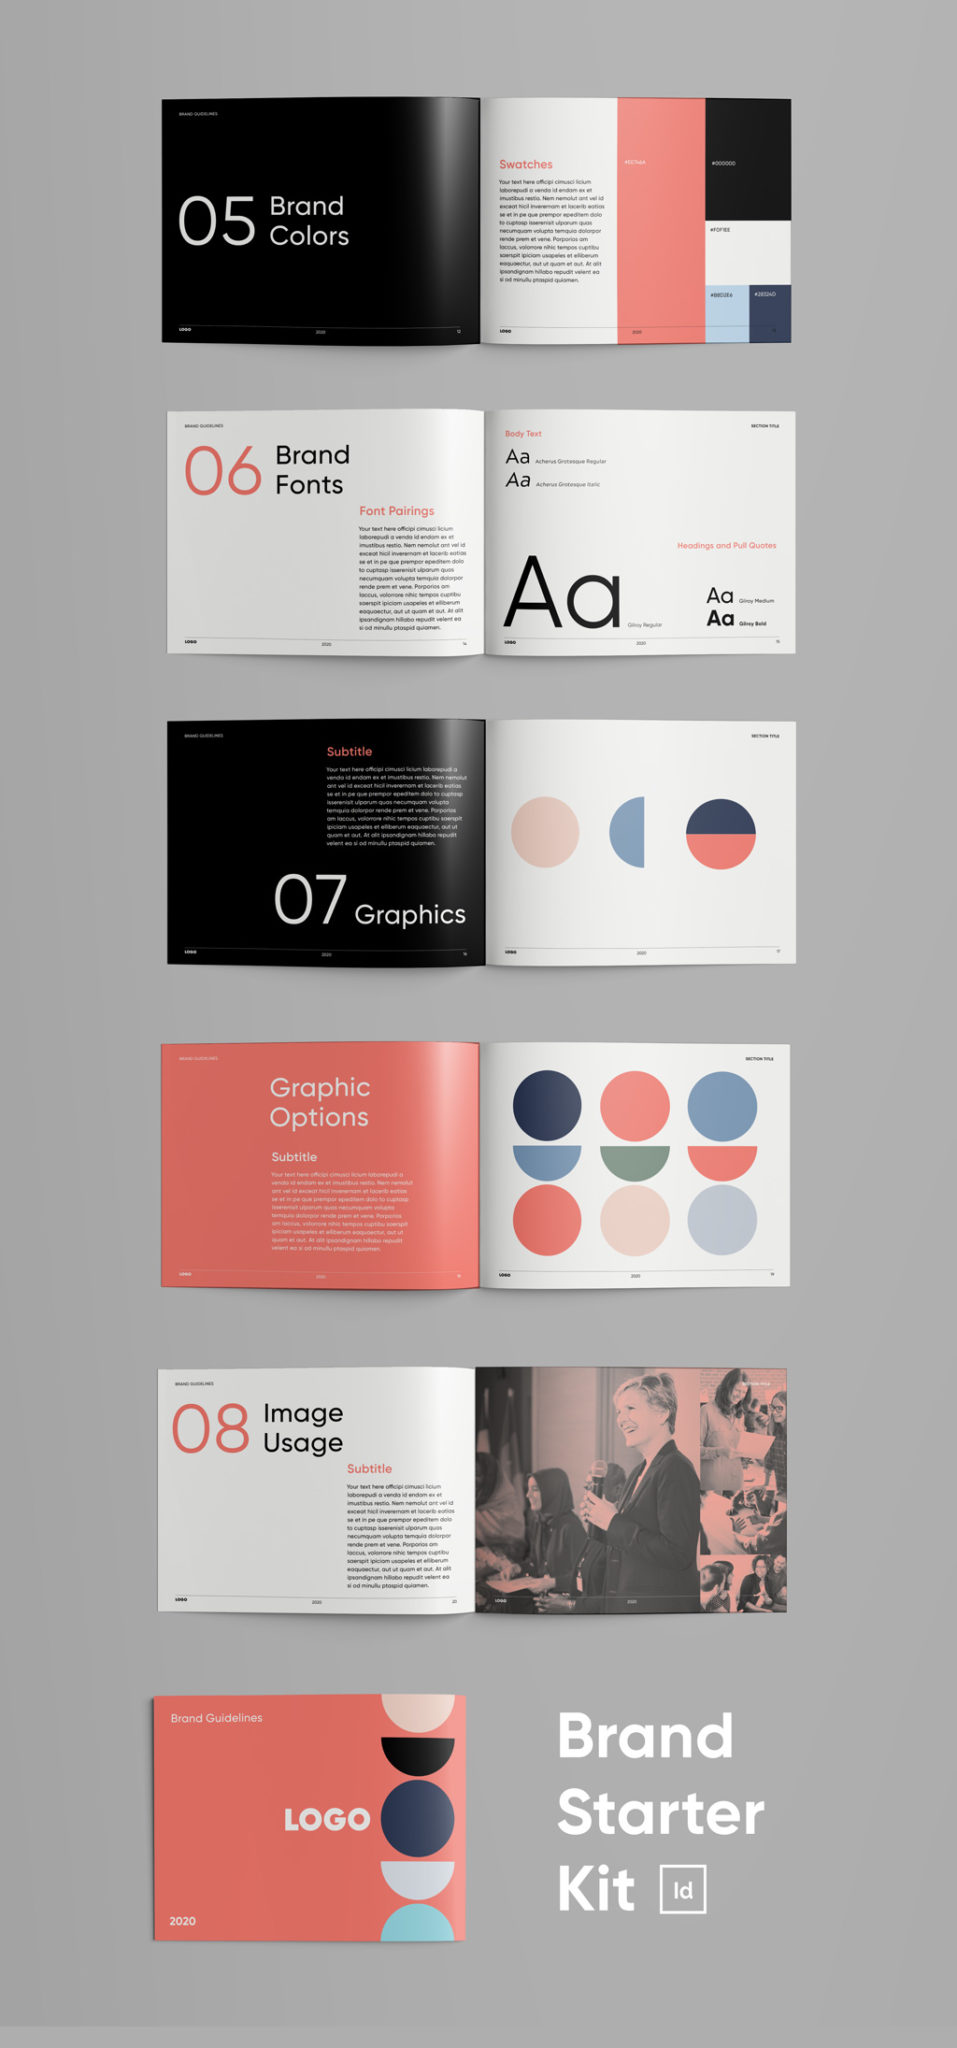 brand starter kit brand guidelines template indesign brand identity template adobe indesign new business indesign templates